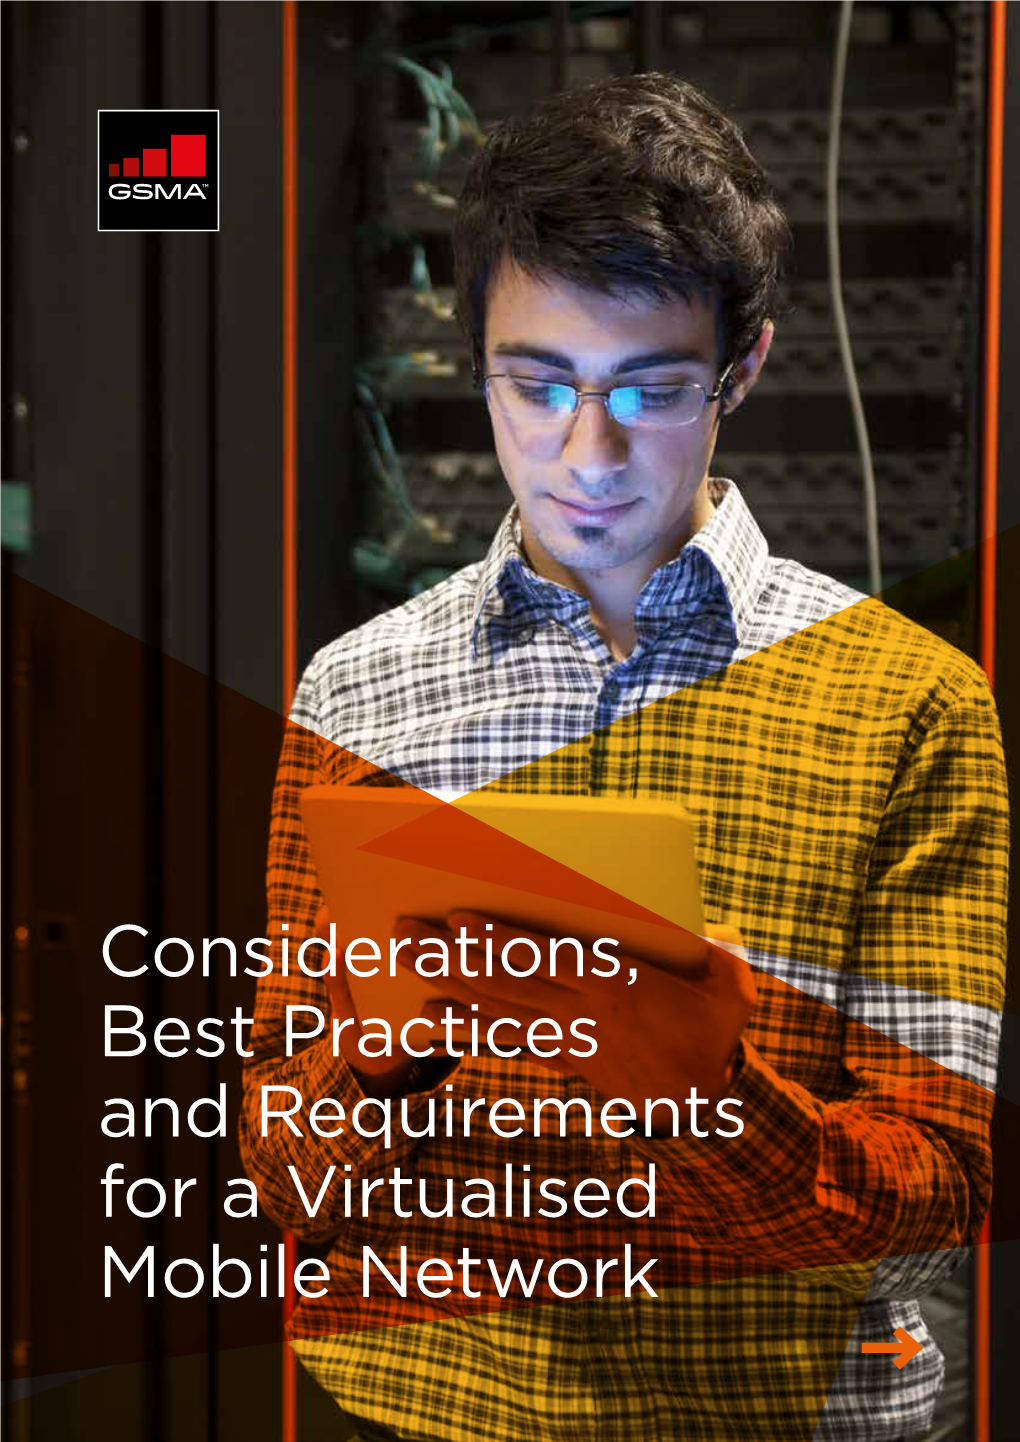 Considerations, Best Practices and Requirements for a Virtualised Mobile Network CONSIDERATIONS, BEST PRACTICES and REQUIREMENTS for a VIRTUALISED MOBILE NETWORK